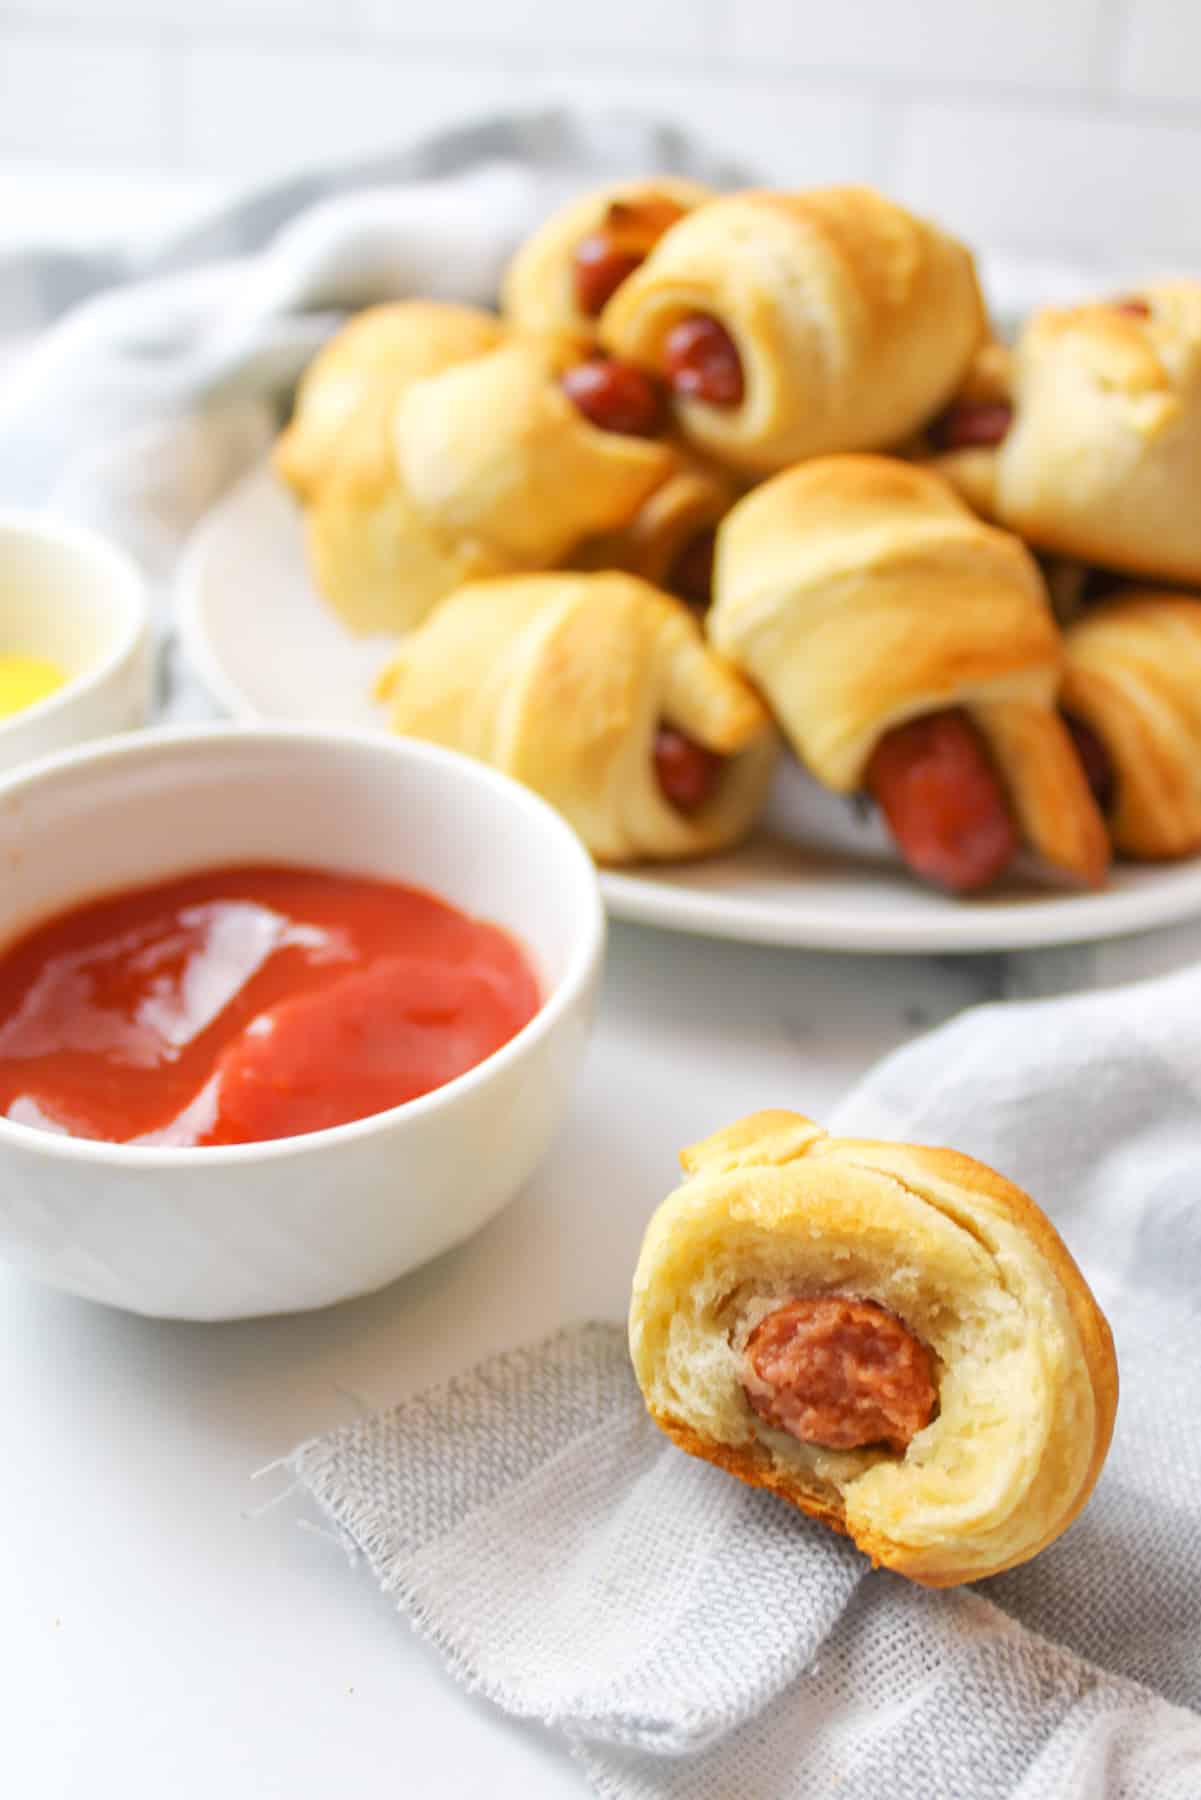 a mini pig in a blanket that had a bite removed with more piggies on a plate in background next to bowls of condiments